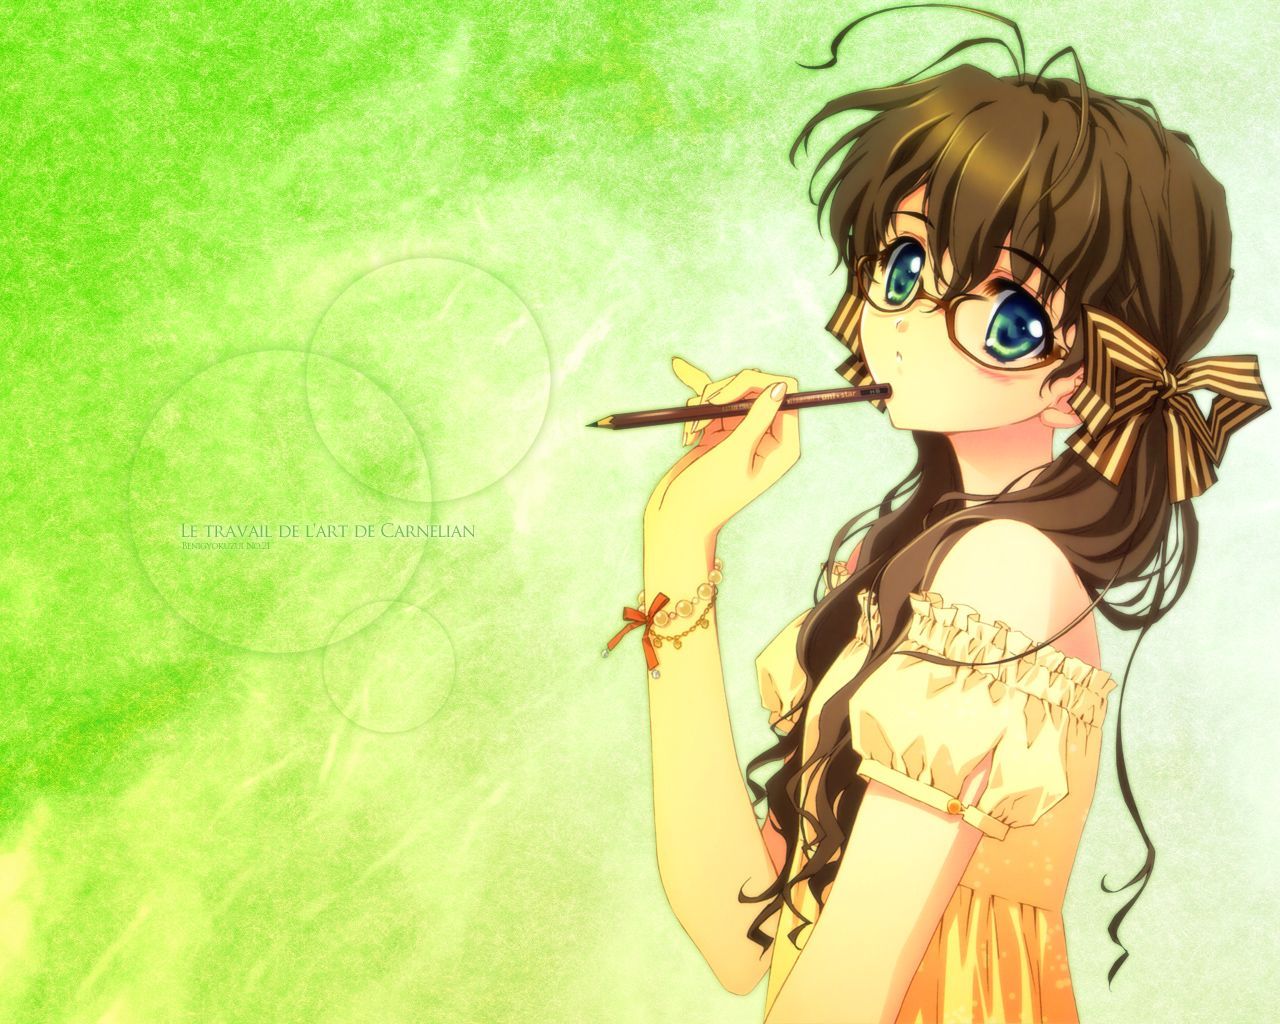 Cute Anime Girl With Brown Hair And Glasses